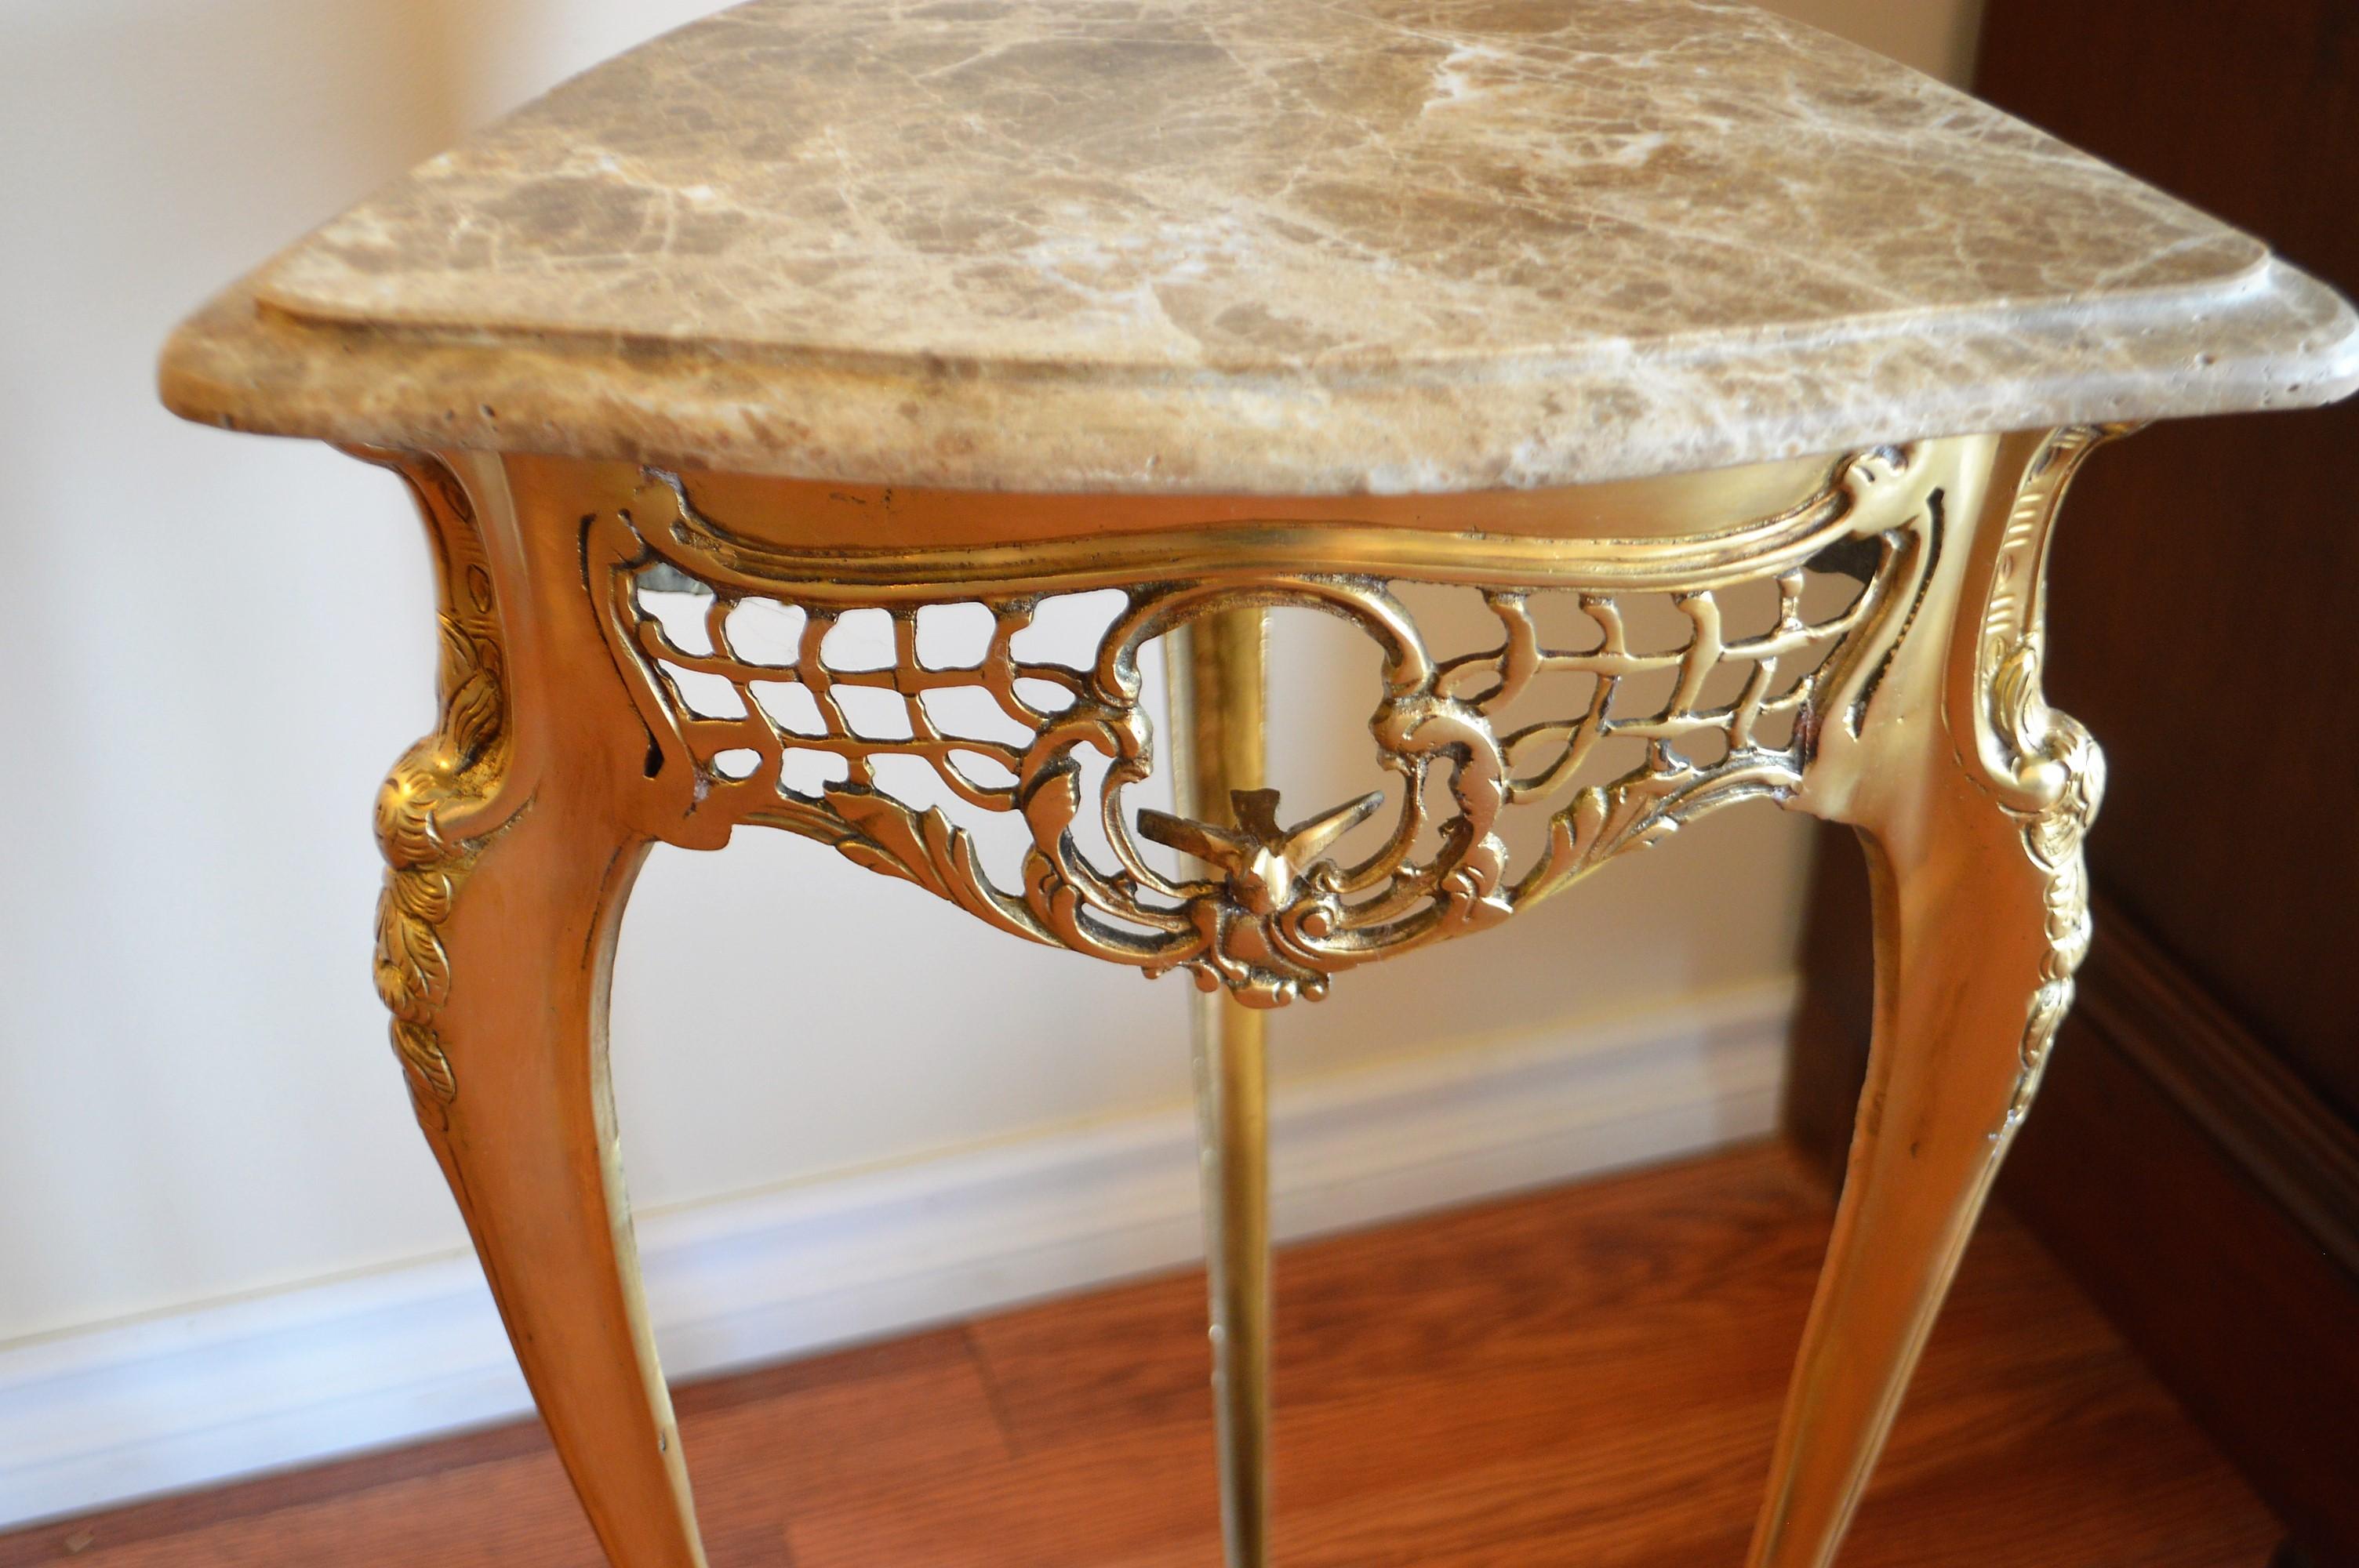 French Pair of Small Side Tables, Bronze Base, Highly Decorative, Lace, Birds, Marble